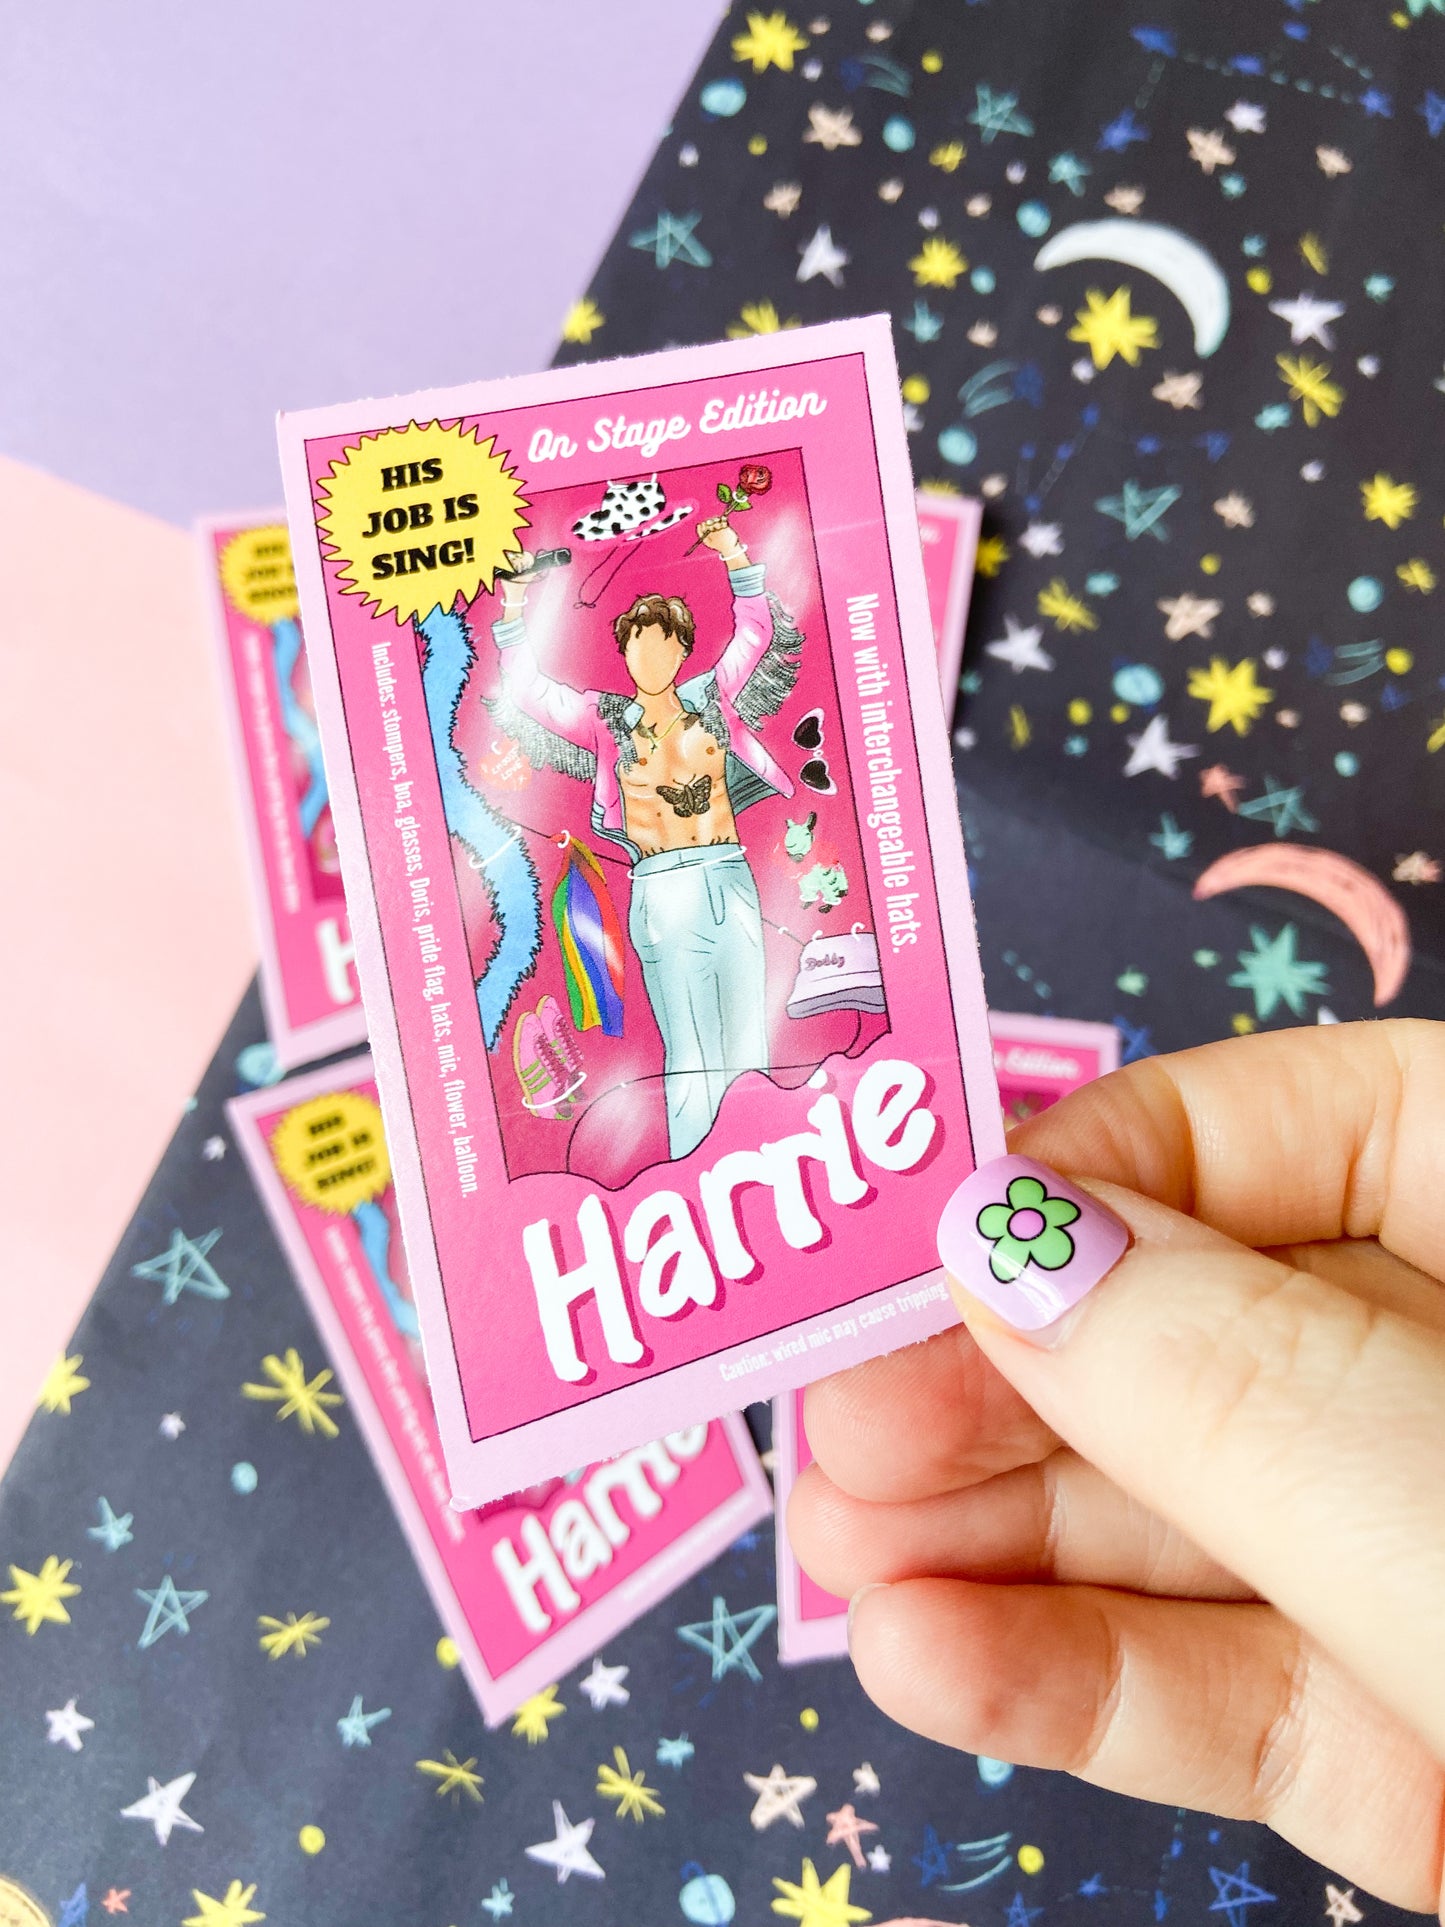 Harrie Sticker, Harry on Stage Edition